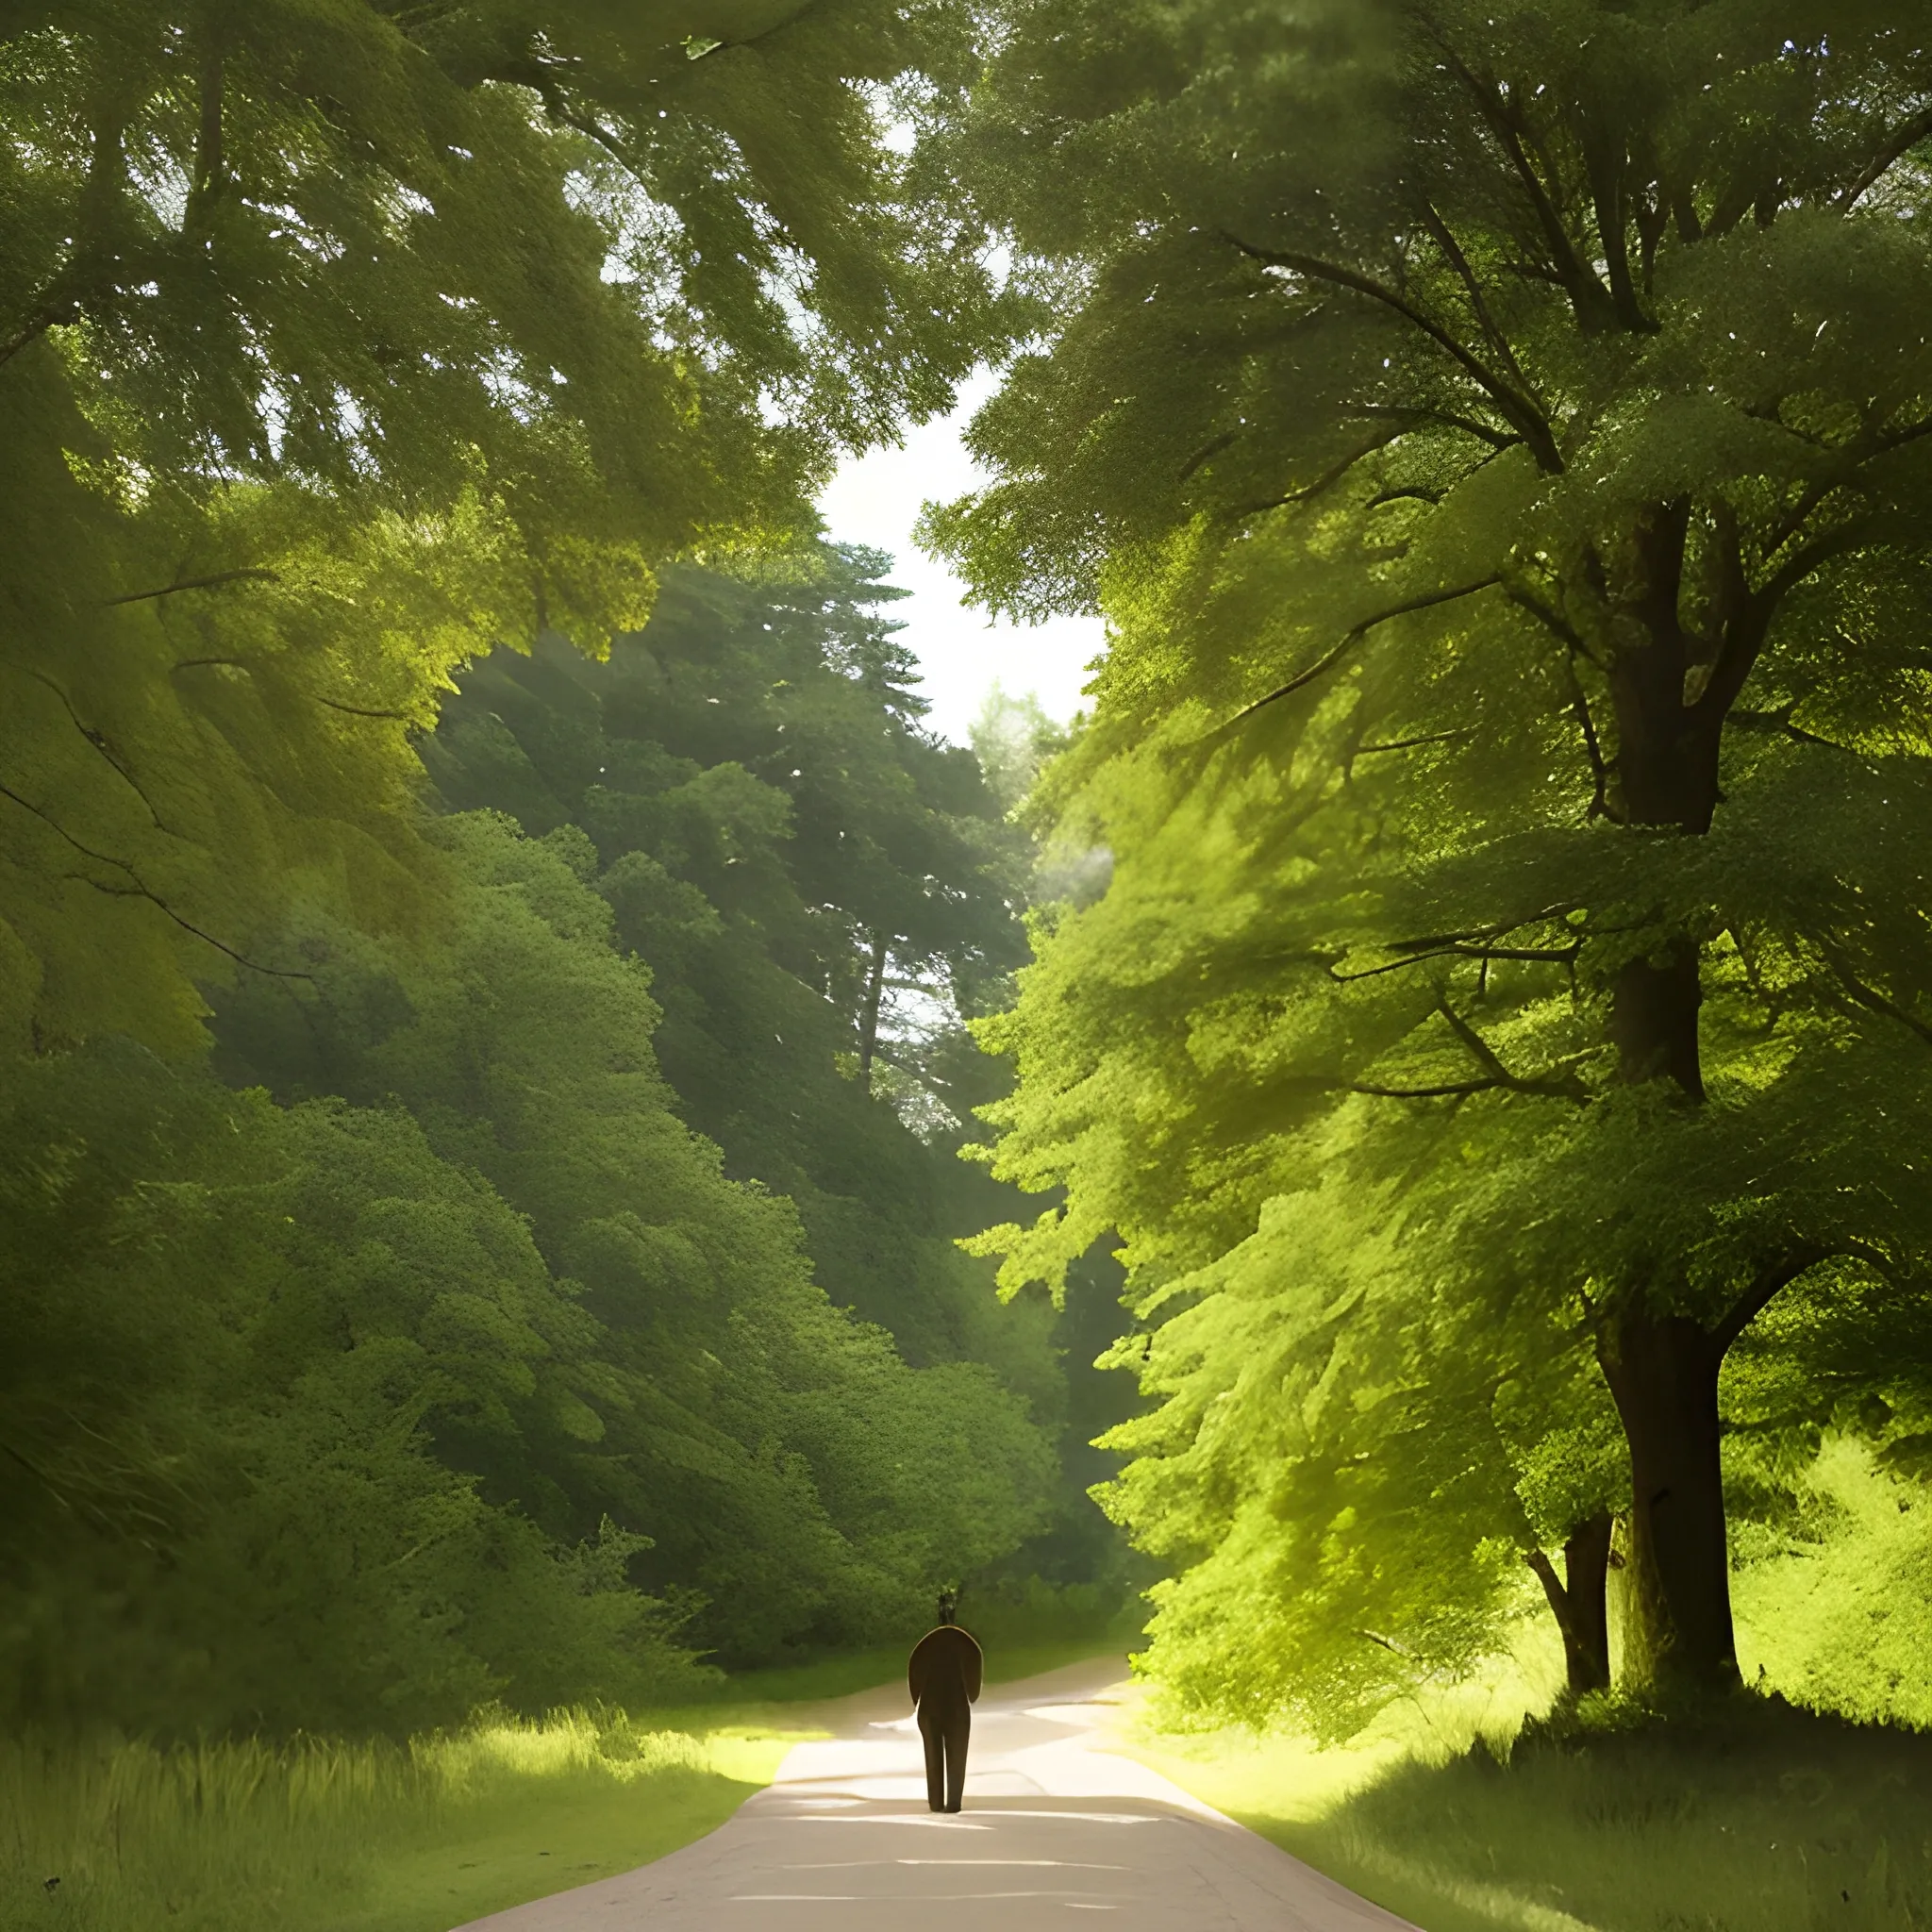 Landscape of a forest with large cedar trees. The leaves are lush green. There is a dirt road going down the middle with trees on either side. There are two figures walking down the road, backs facing the camera. One figure is a man with red hair and simple medieval garb and a pack on his back. The other figure is a woman with long brown hair and a plain white dress. High quality. Realistic. Medieval times. 